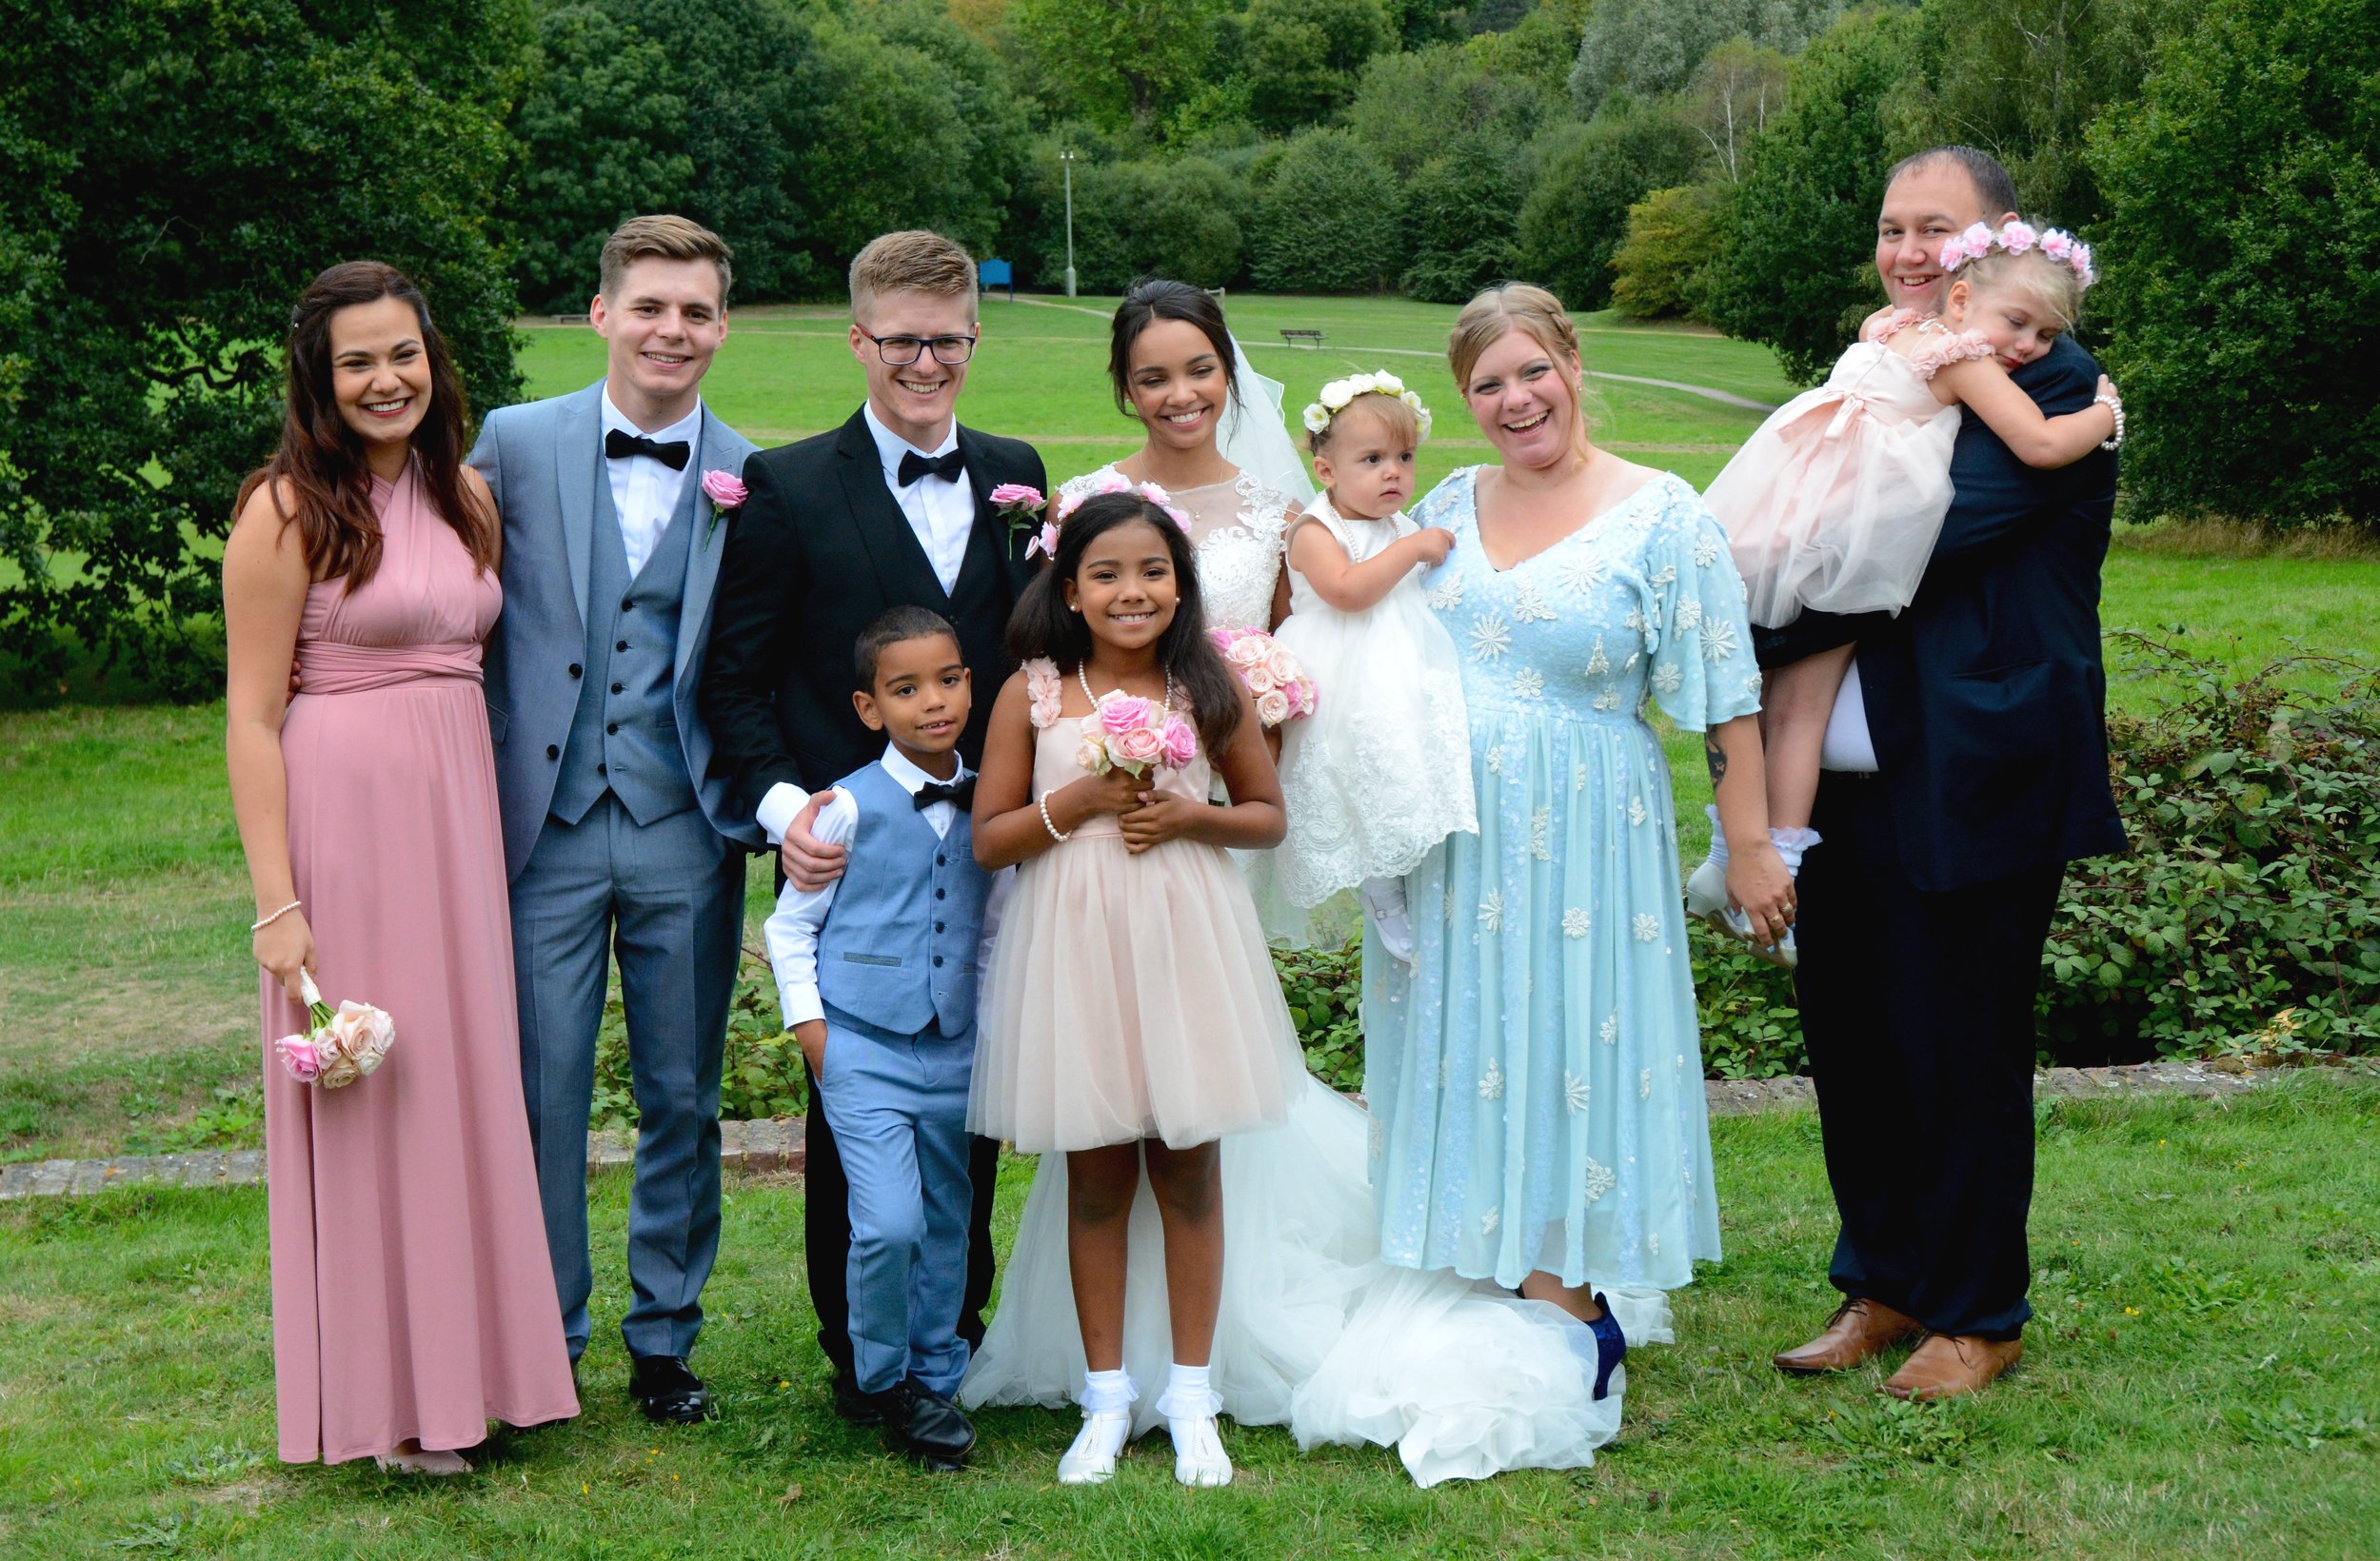 Siblings and their families wedding photo